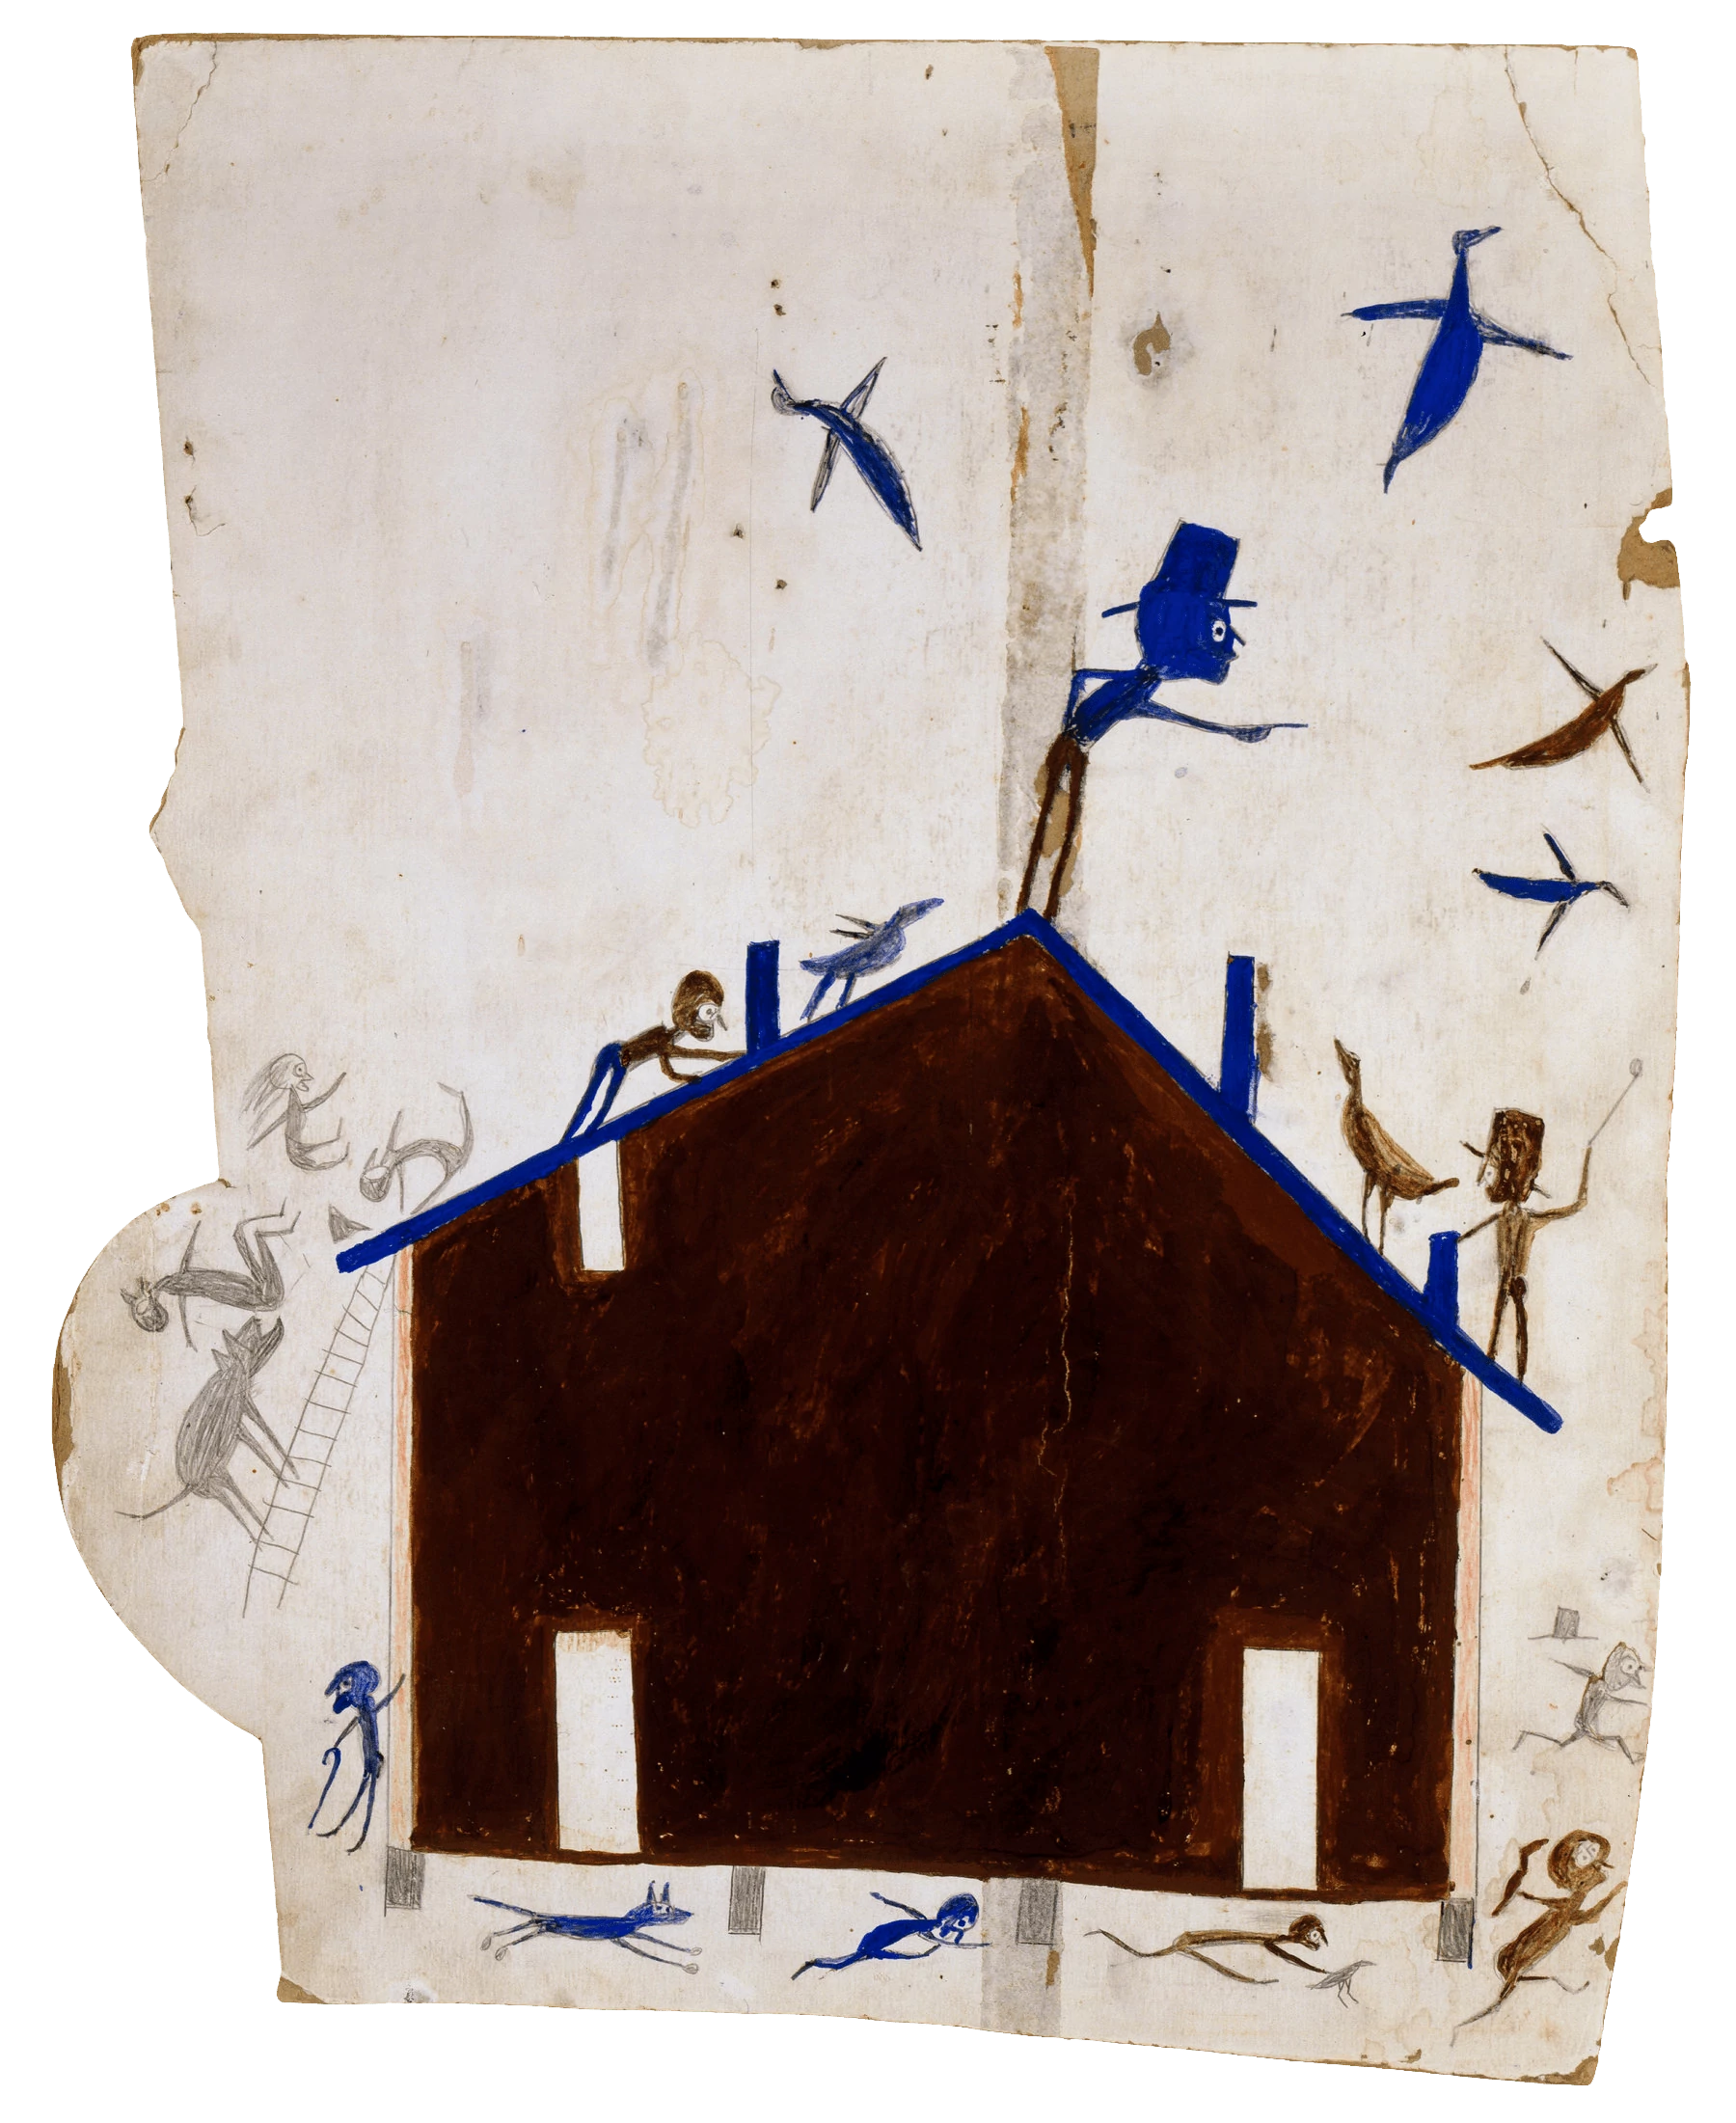 Brown House with Multiple Figures and Birds, Bill Traylor